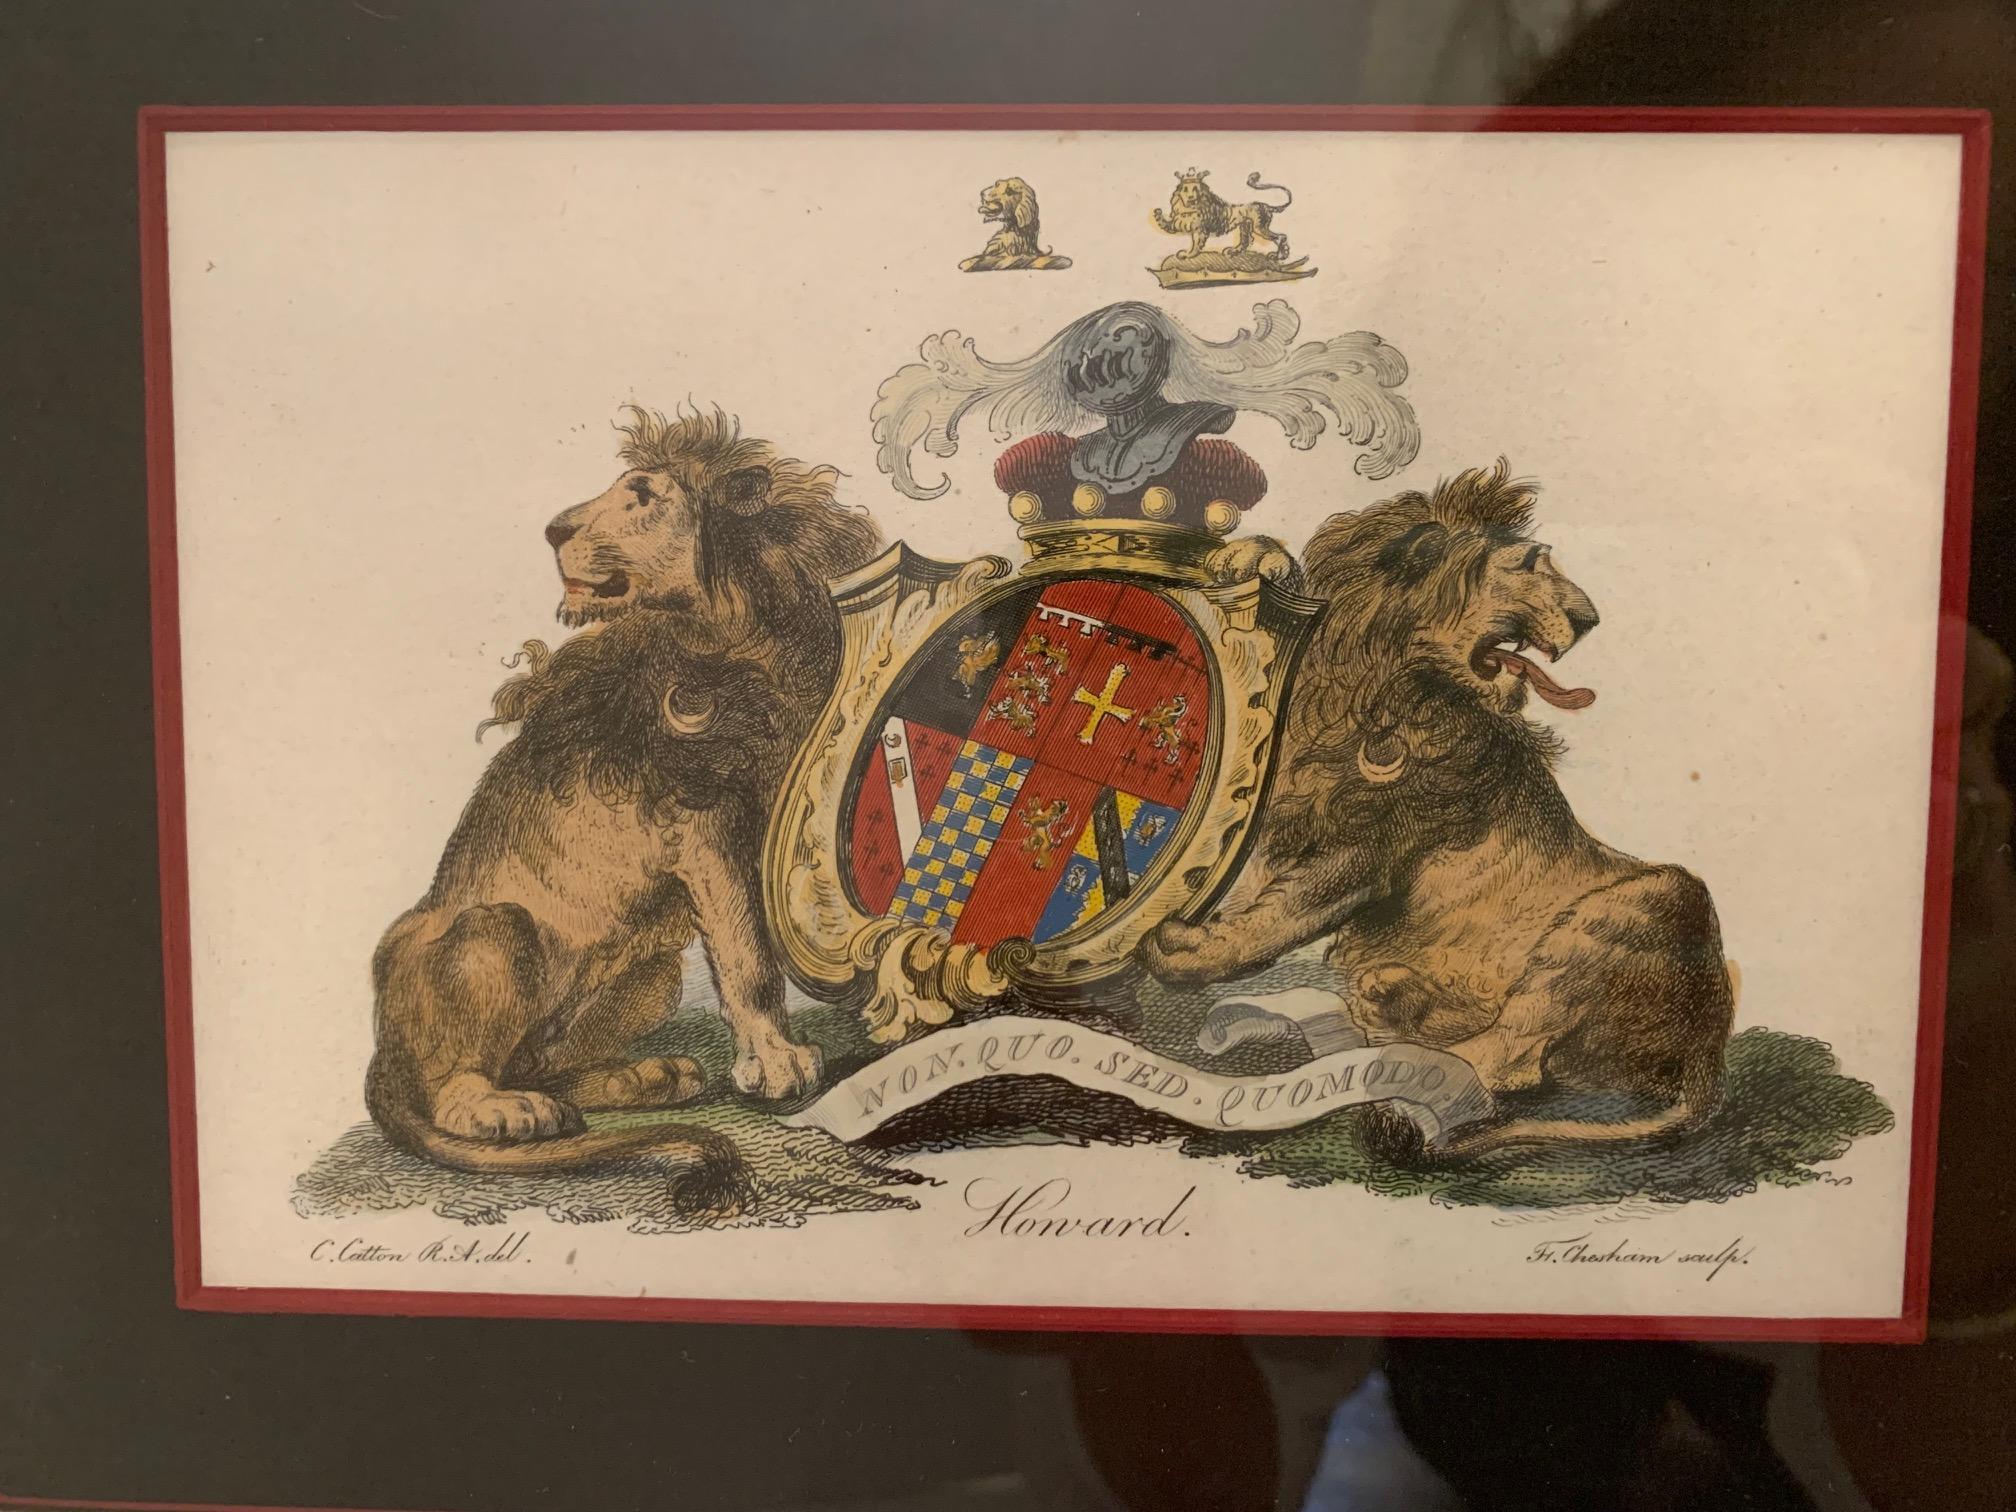 Beautifully framed pair of colored etchings having a regal feel with royal shields flanked by lions, elk and such.